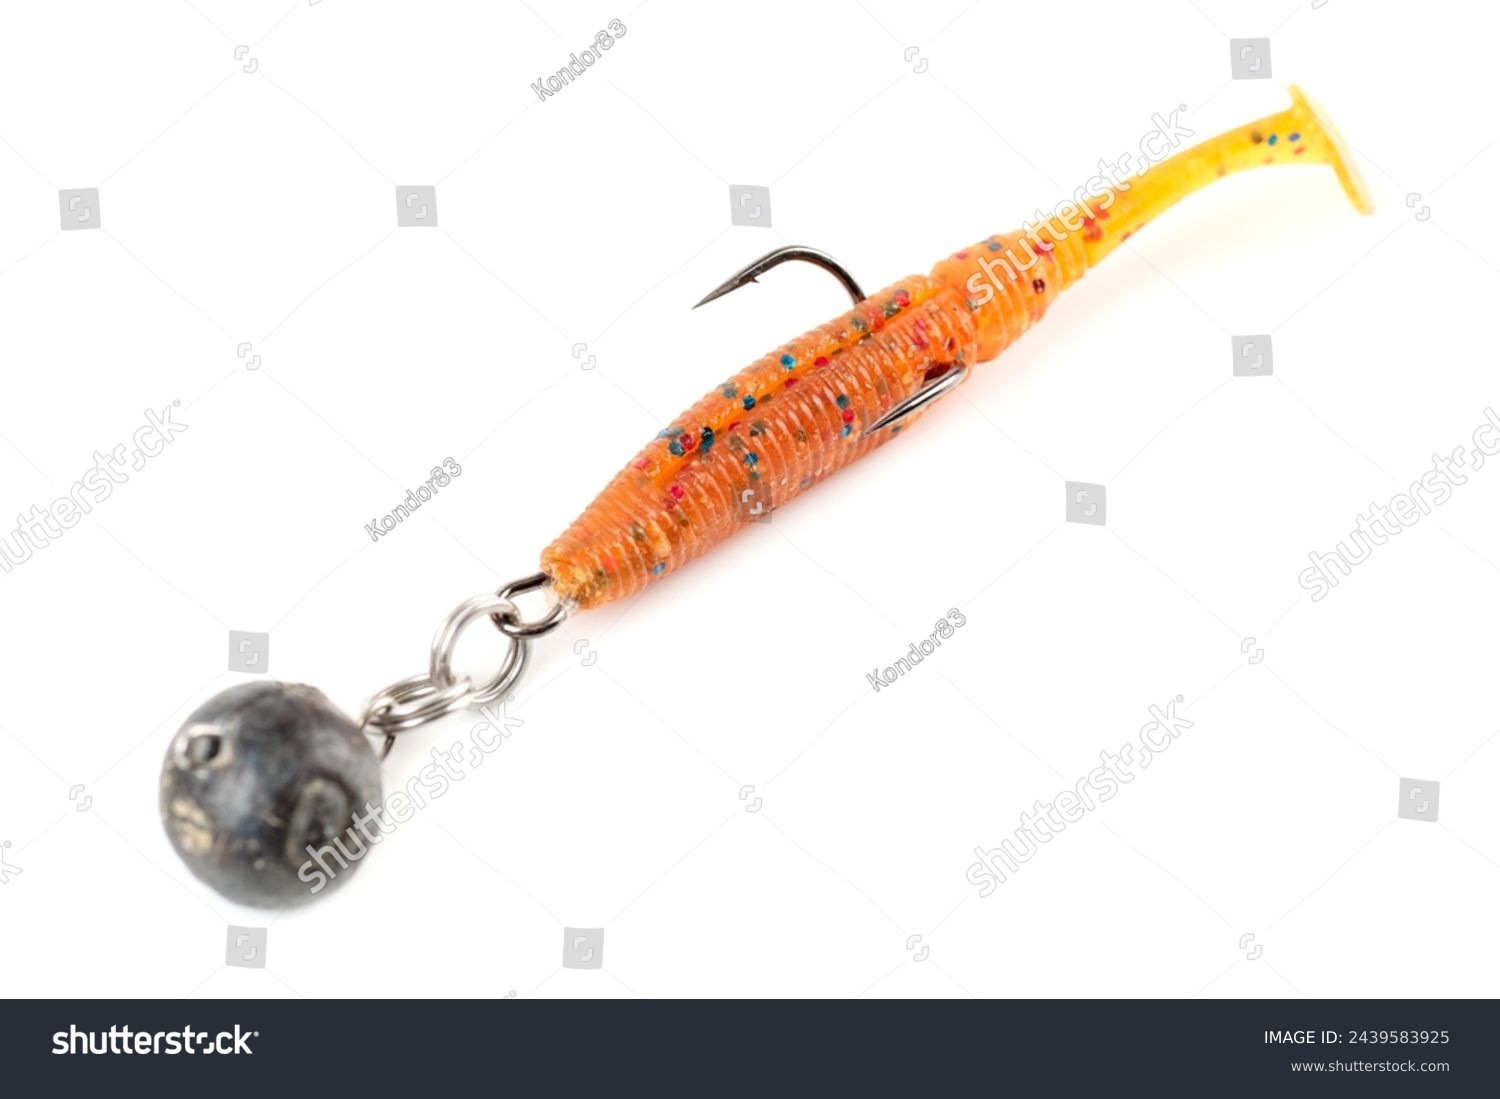 Orange fishing lure, plastic shad fish, with double hook and lead sinker, isolated on white background #2439583925